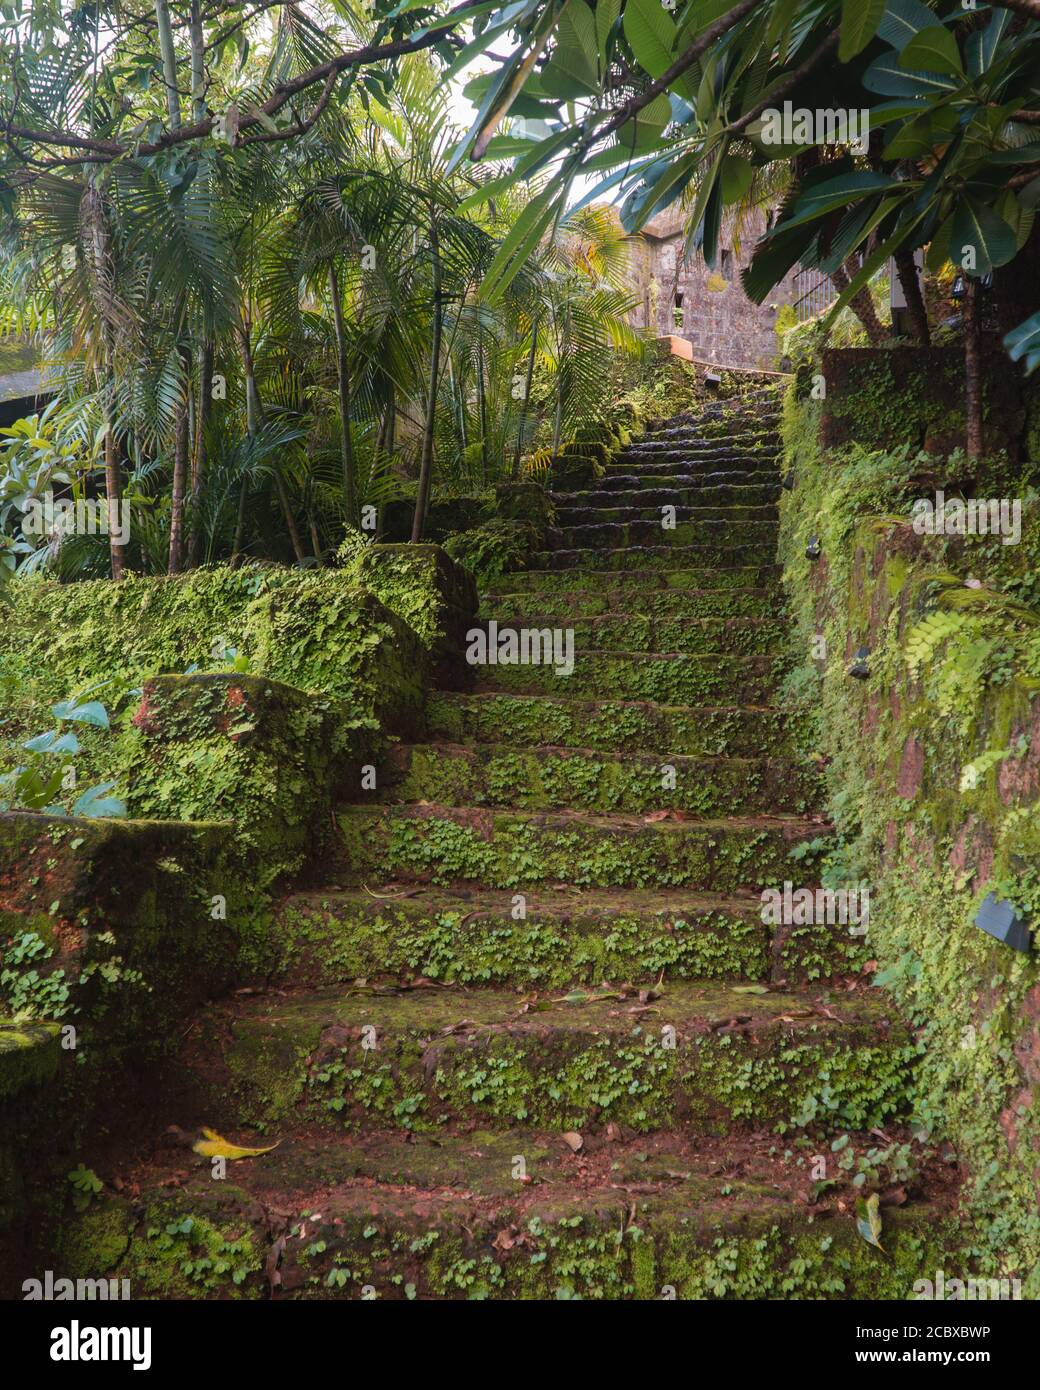 A stairway built from red laterite stones and leading up to the top, with moss and other vegetation grown on it during the monsoons, in Goa, India Stock Photo